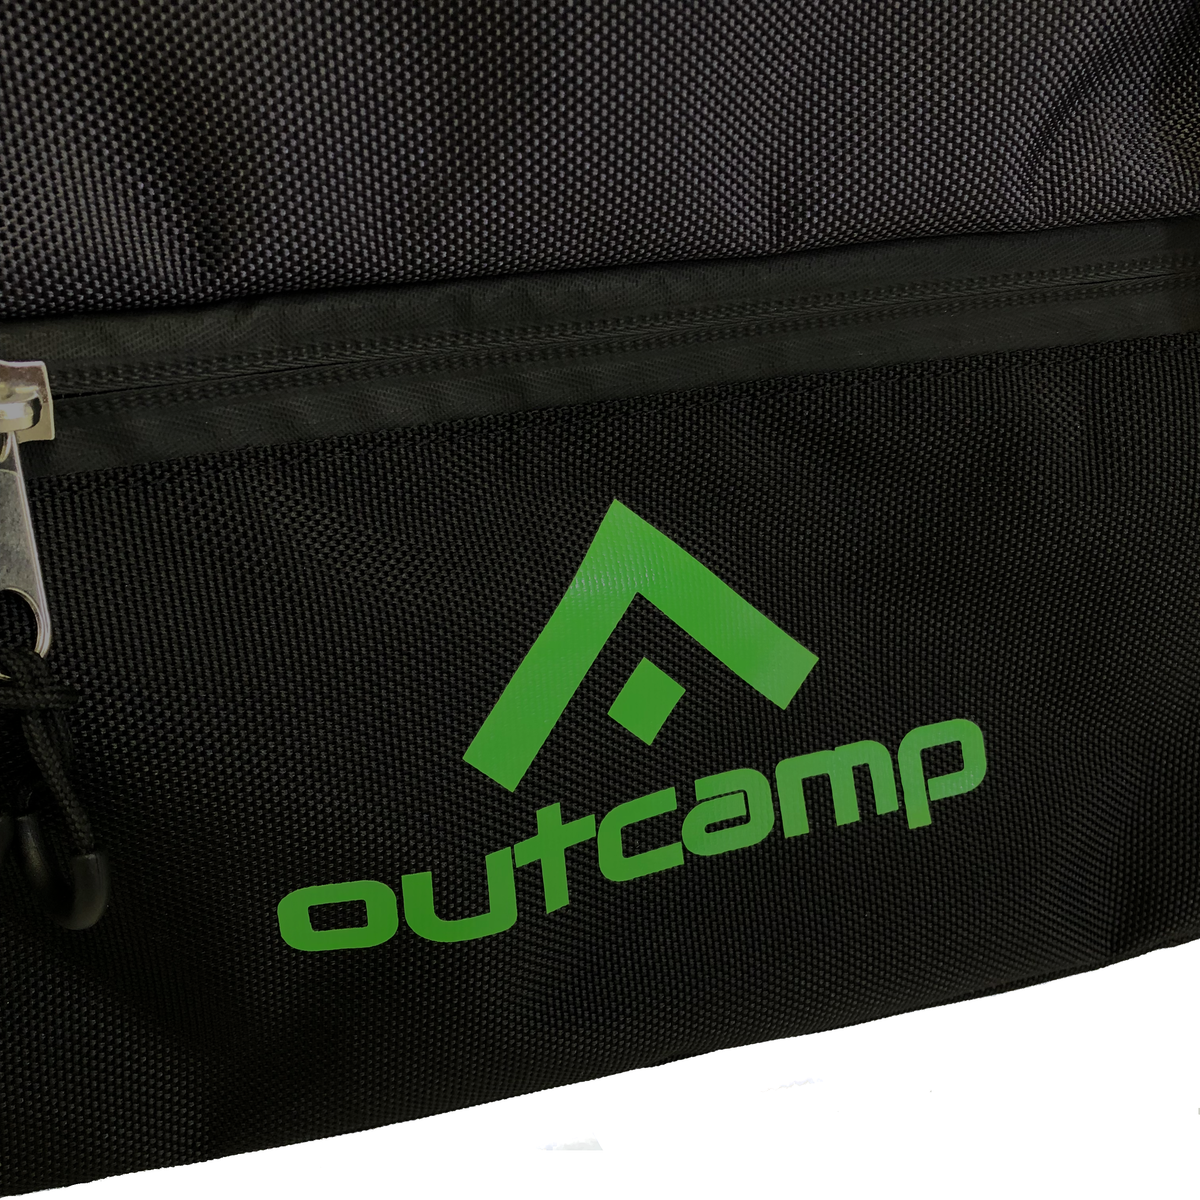 Outcamp bag with weather proof zippers